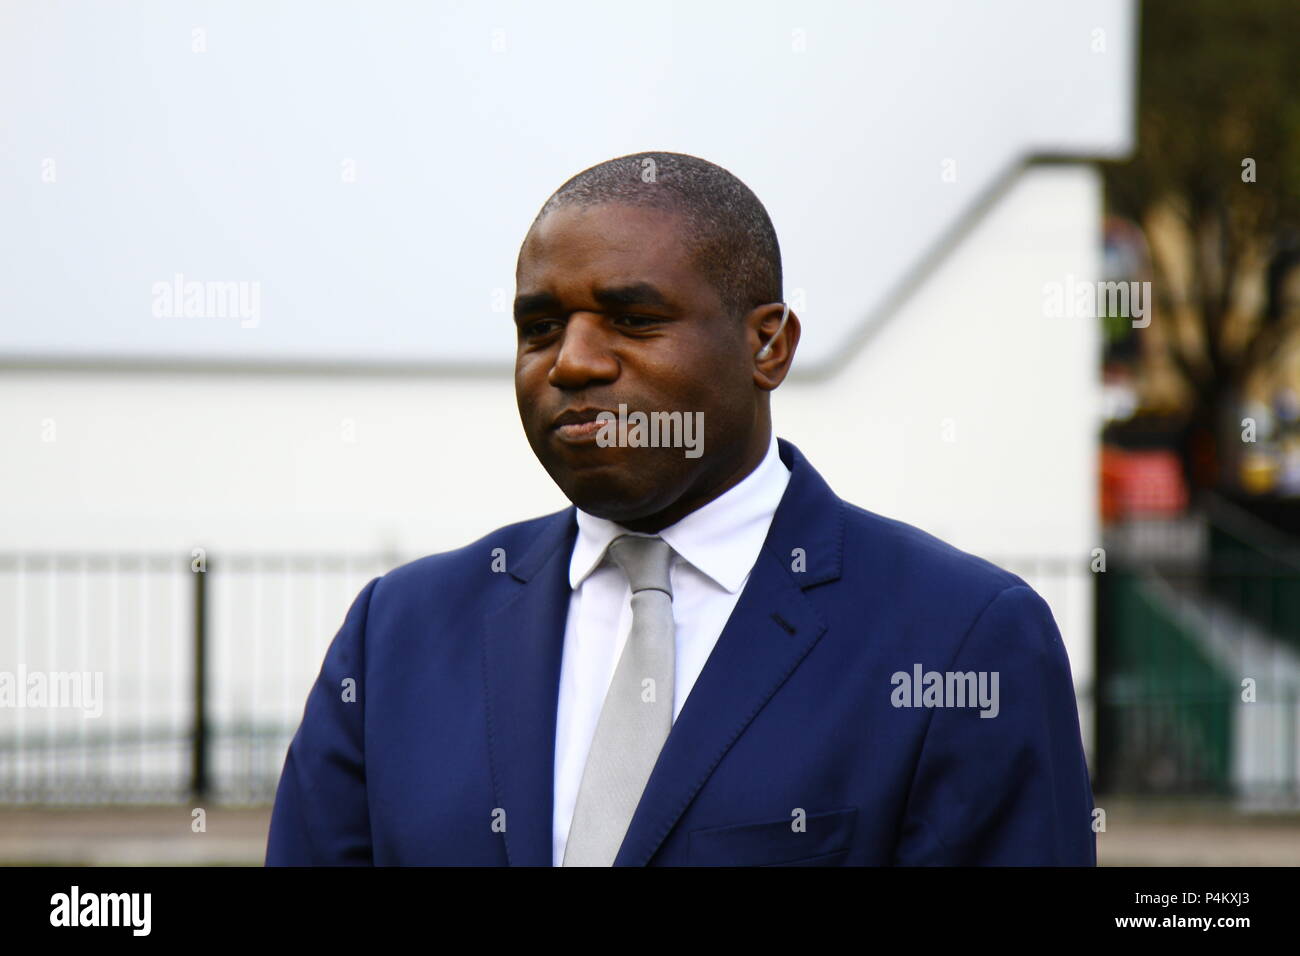 David Lammy British Labour party MP pictured on College Green, Westminster , London, UK on 4th March 2015. British Politicians. MPS. Stock Photo